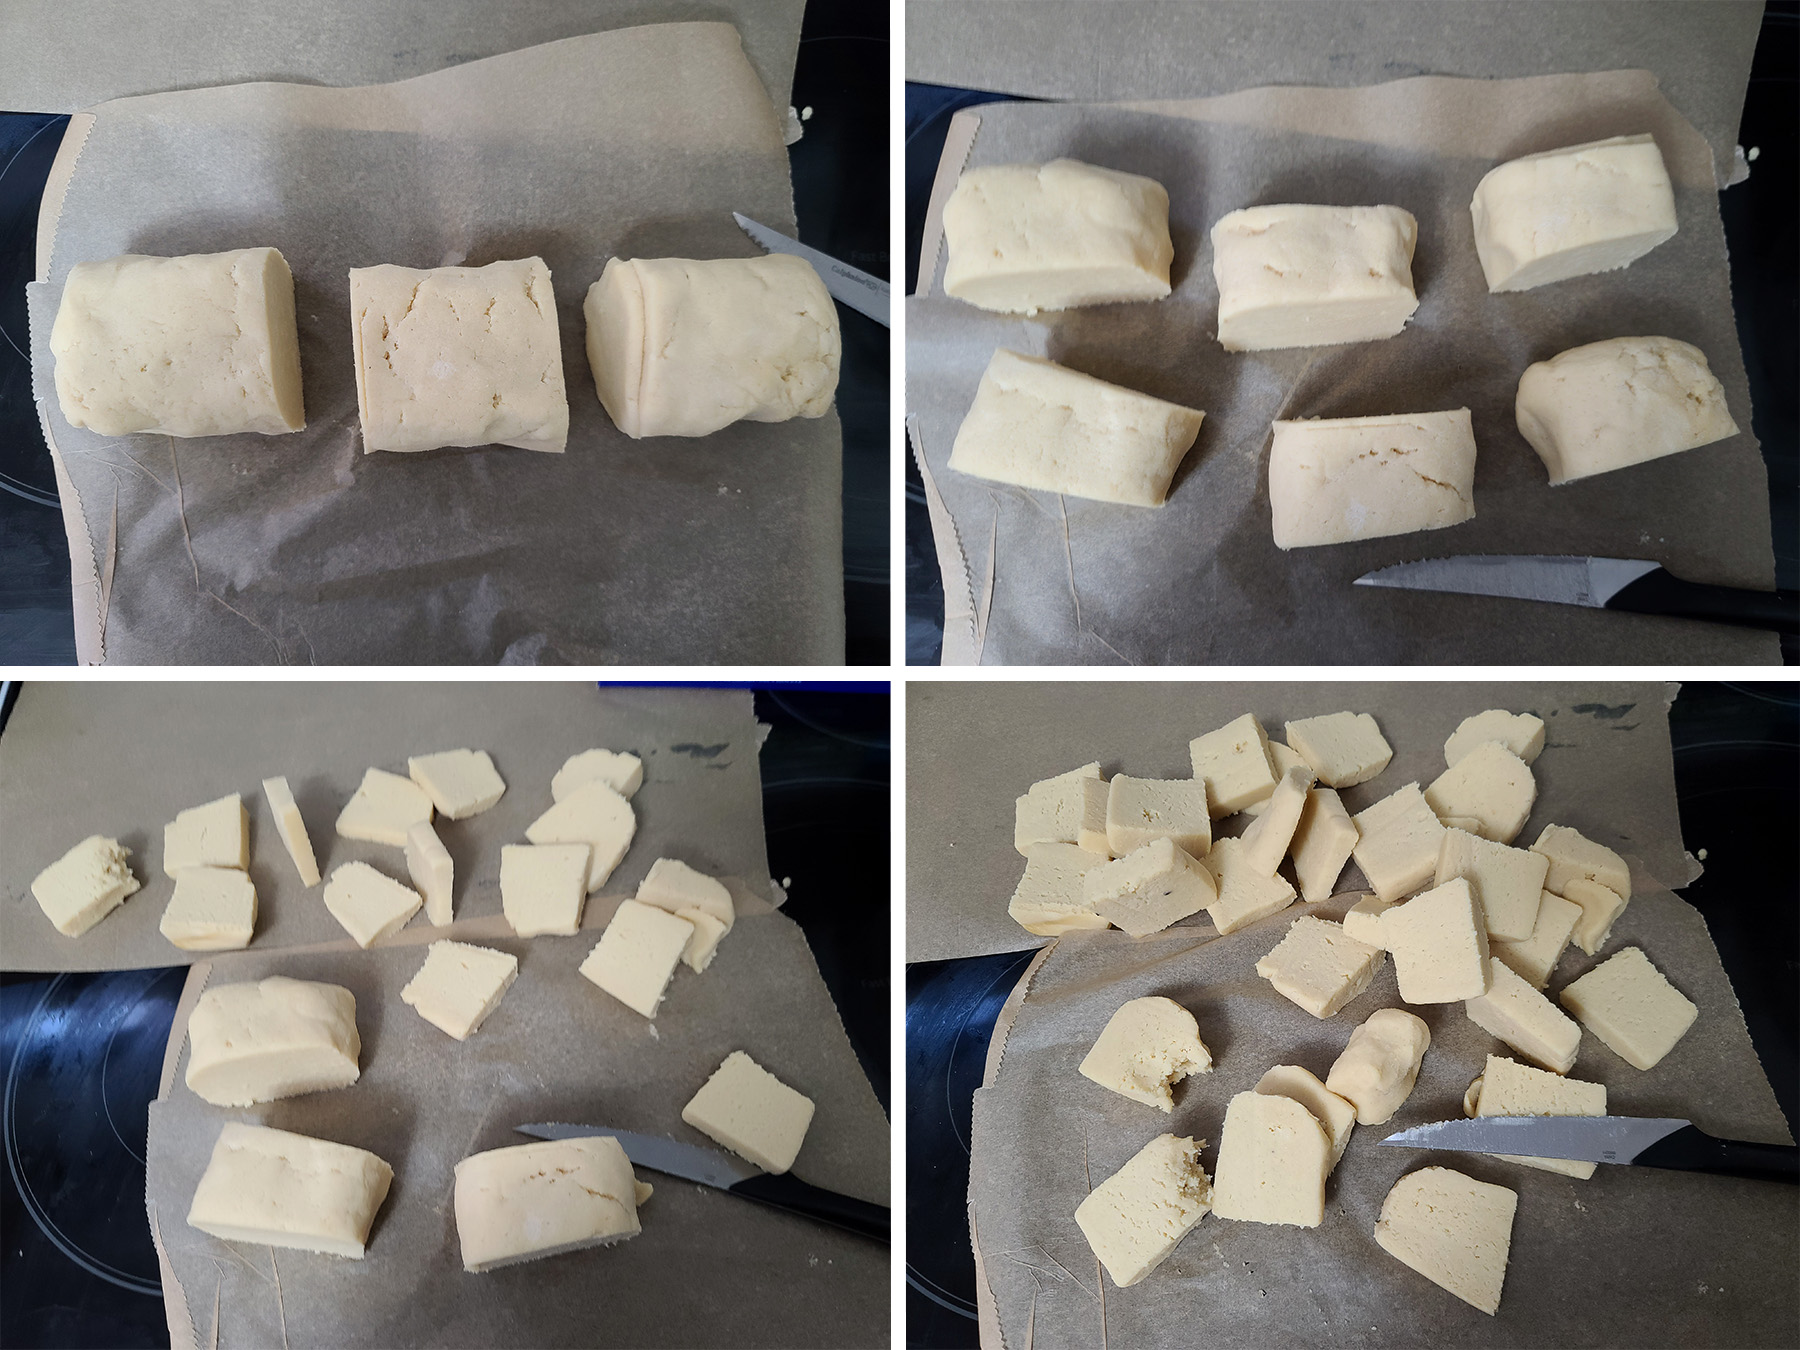 A 4 part image showing the dough being divided into 30 pieces, in stages.